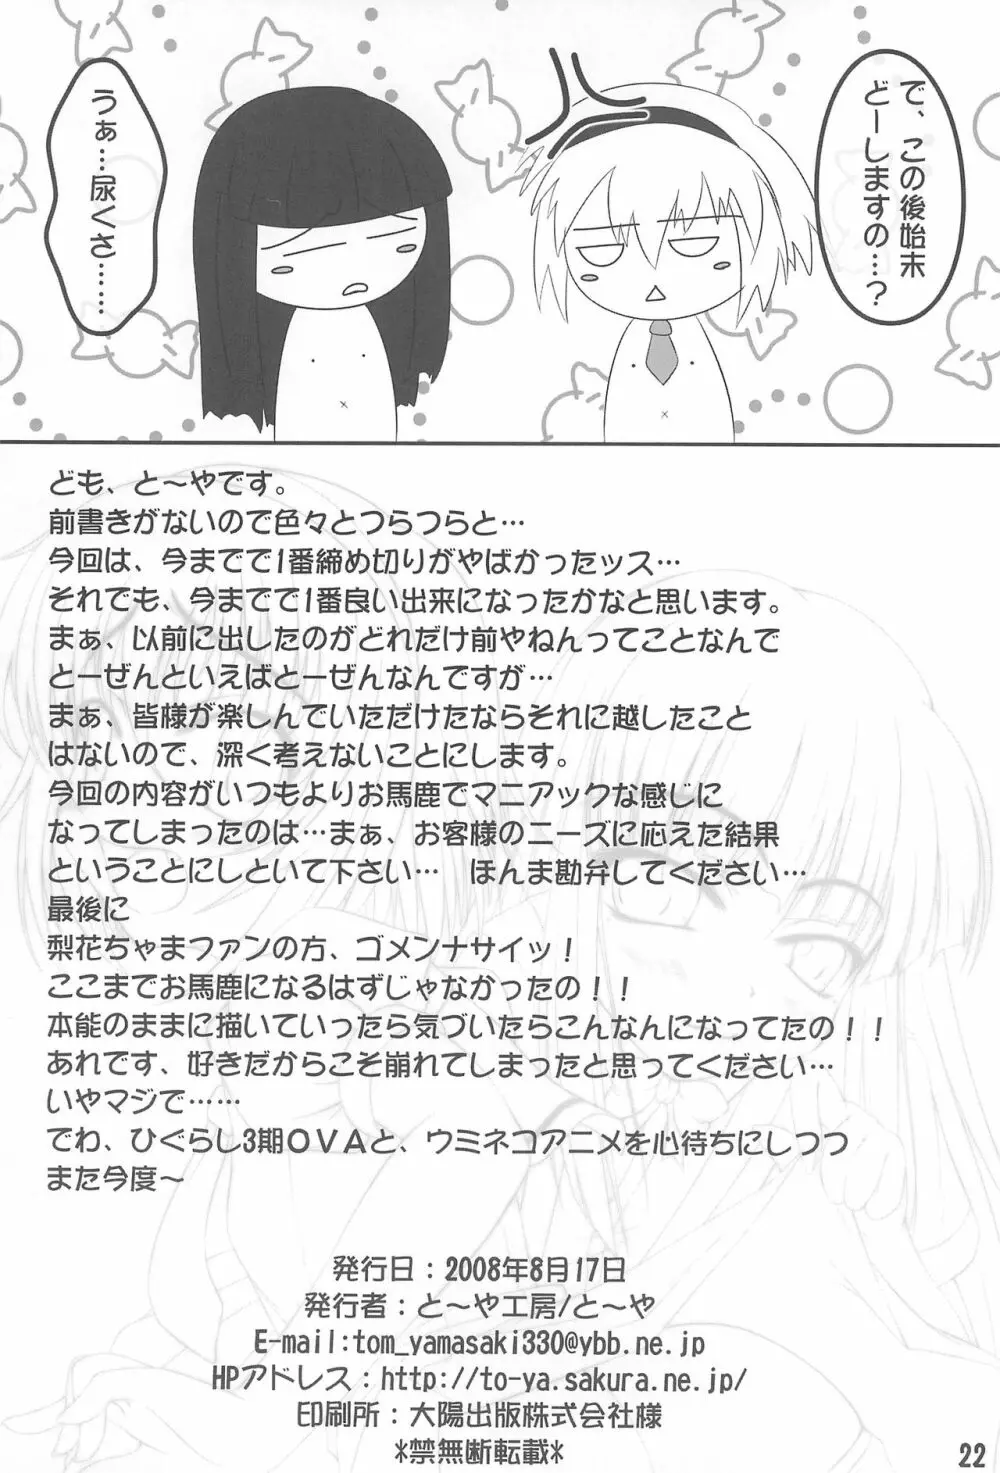 Tips 部活の後の… - page22